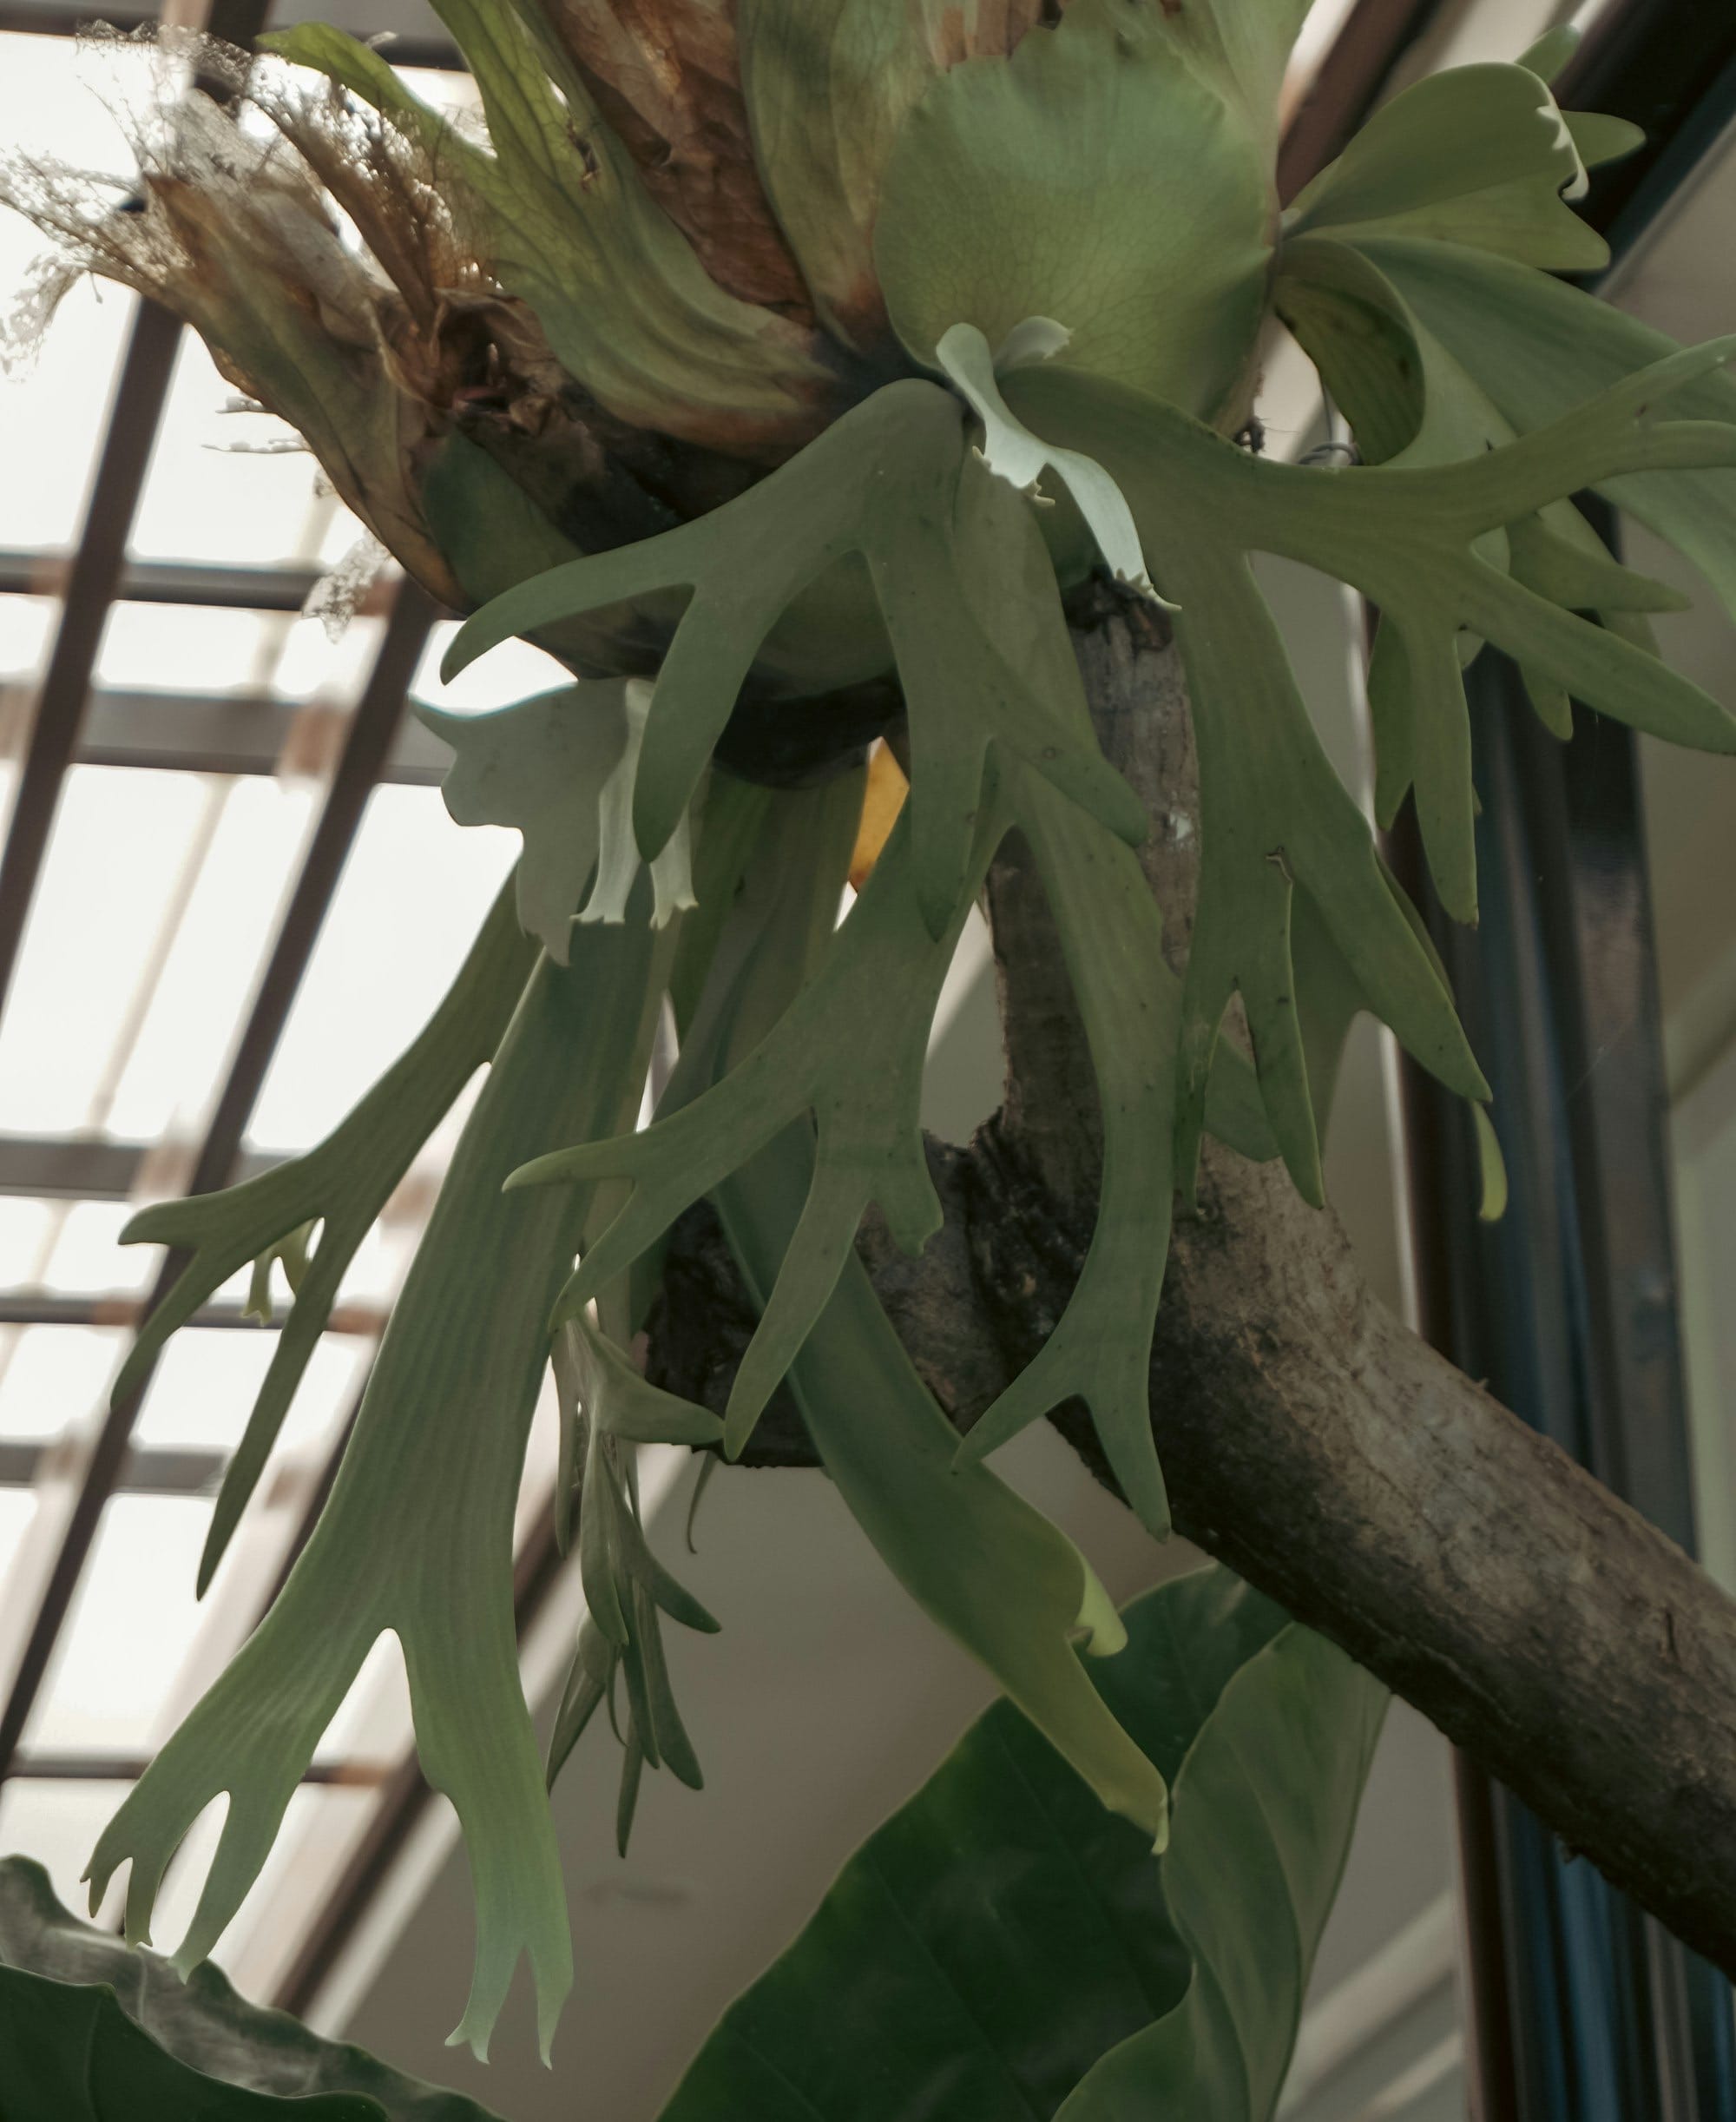 Staghorn fern mounted on a branch